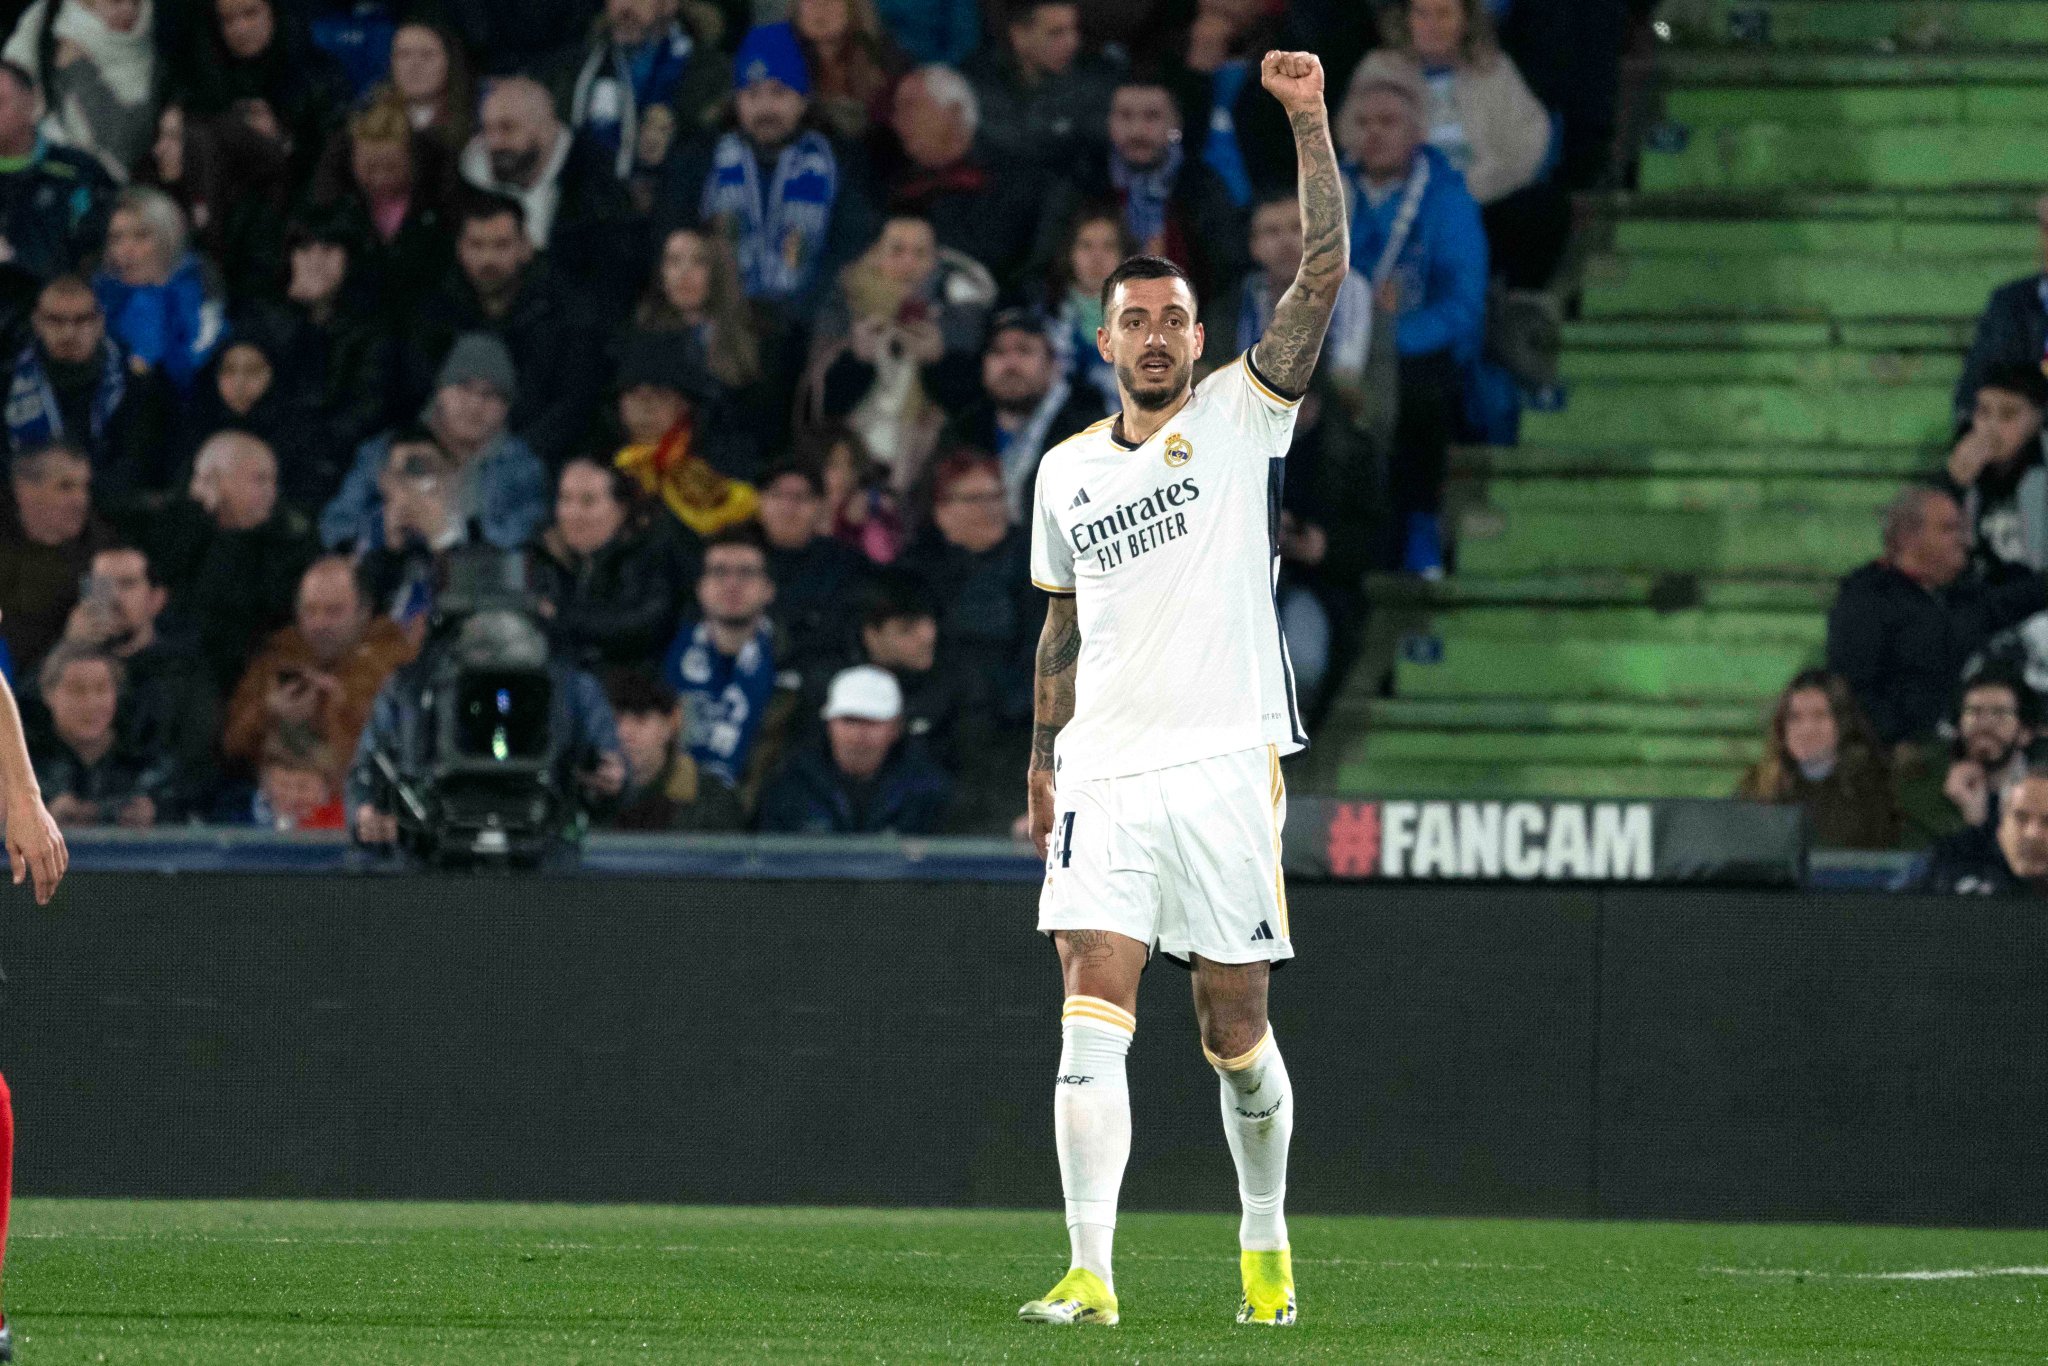 Club coach becomes second to accuse Real Madrid forward of blackmail in transfer dealings